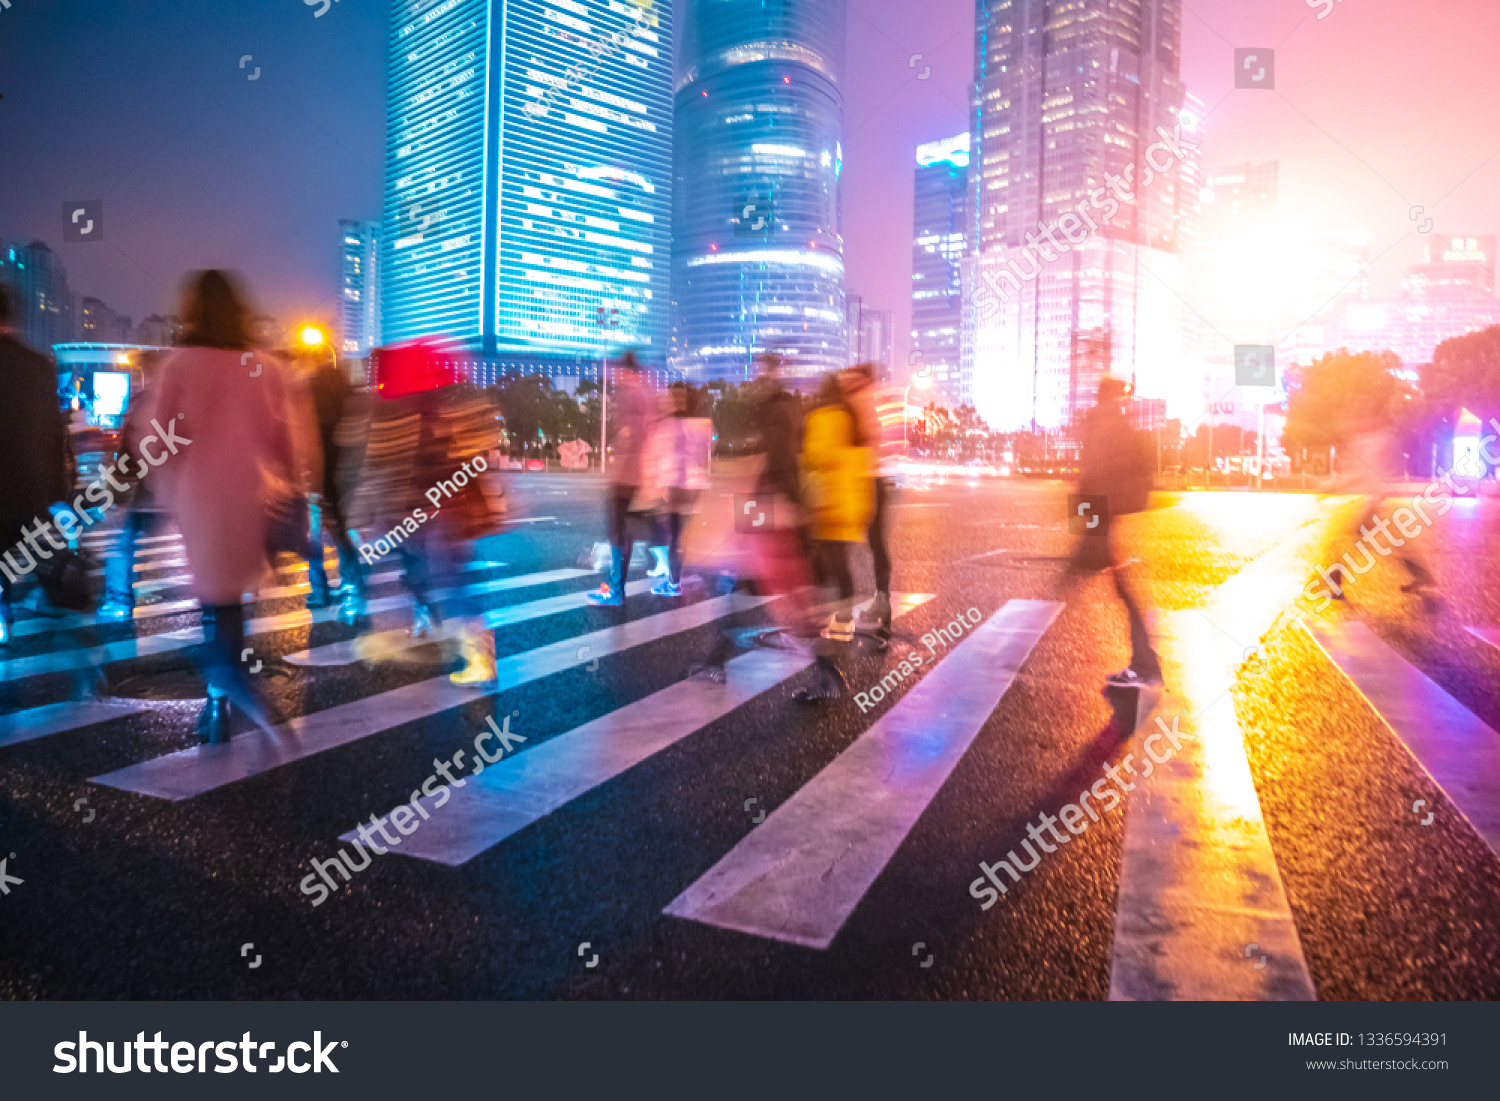 Abstract background of People across the crosswalk at night in Shanghai, China. Perfect background image of blurred night street with unrecognizable people and cars in night illumination  #1336594391